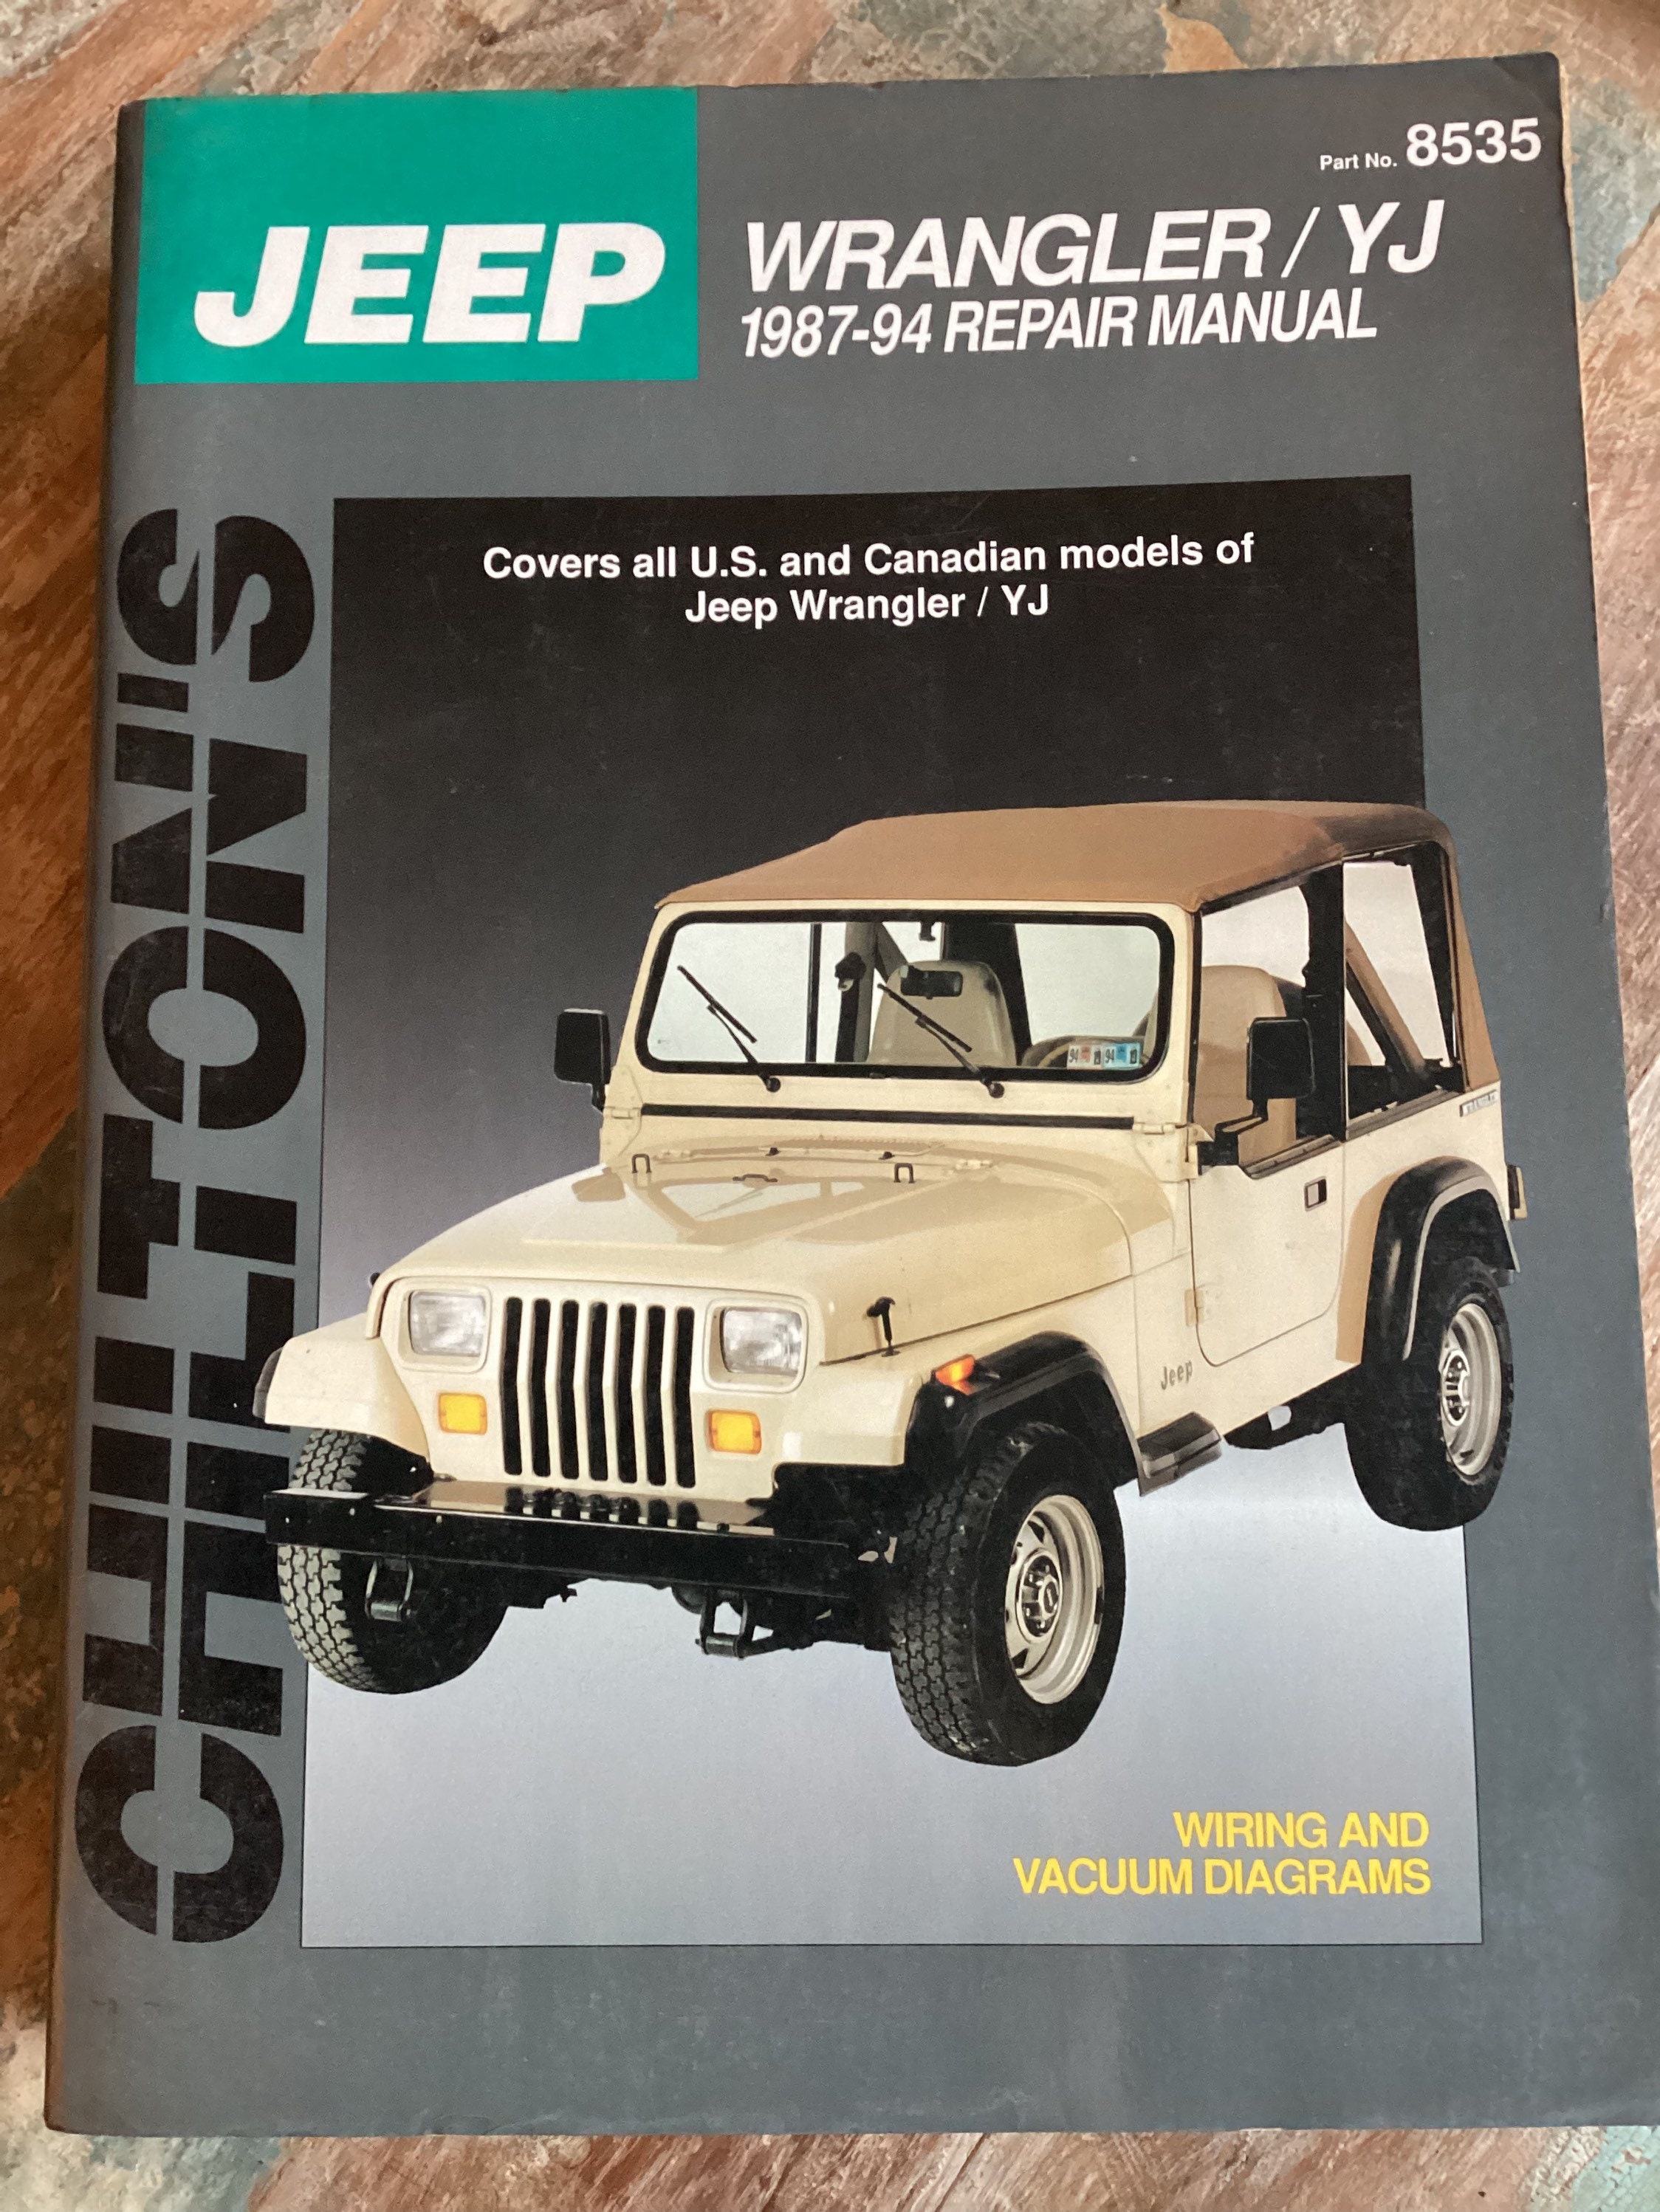 1987-1994 JEEP WRANGLER How to Manual Chiltons Auto Repair - Etsy